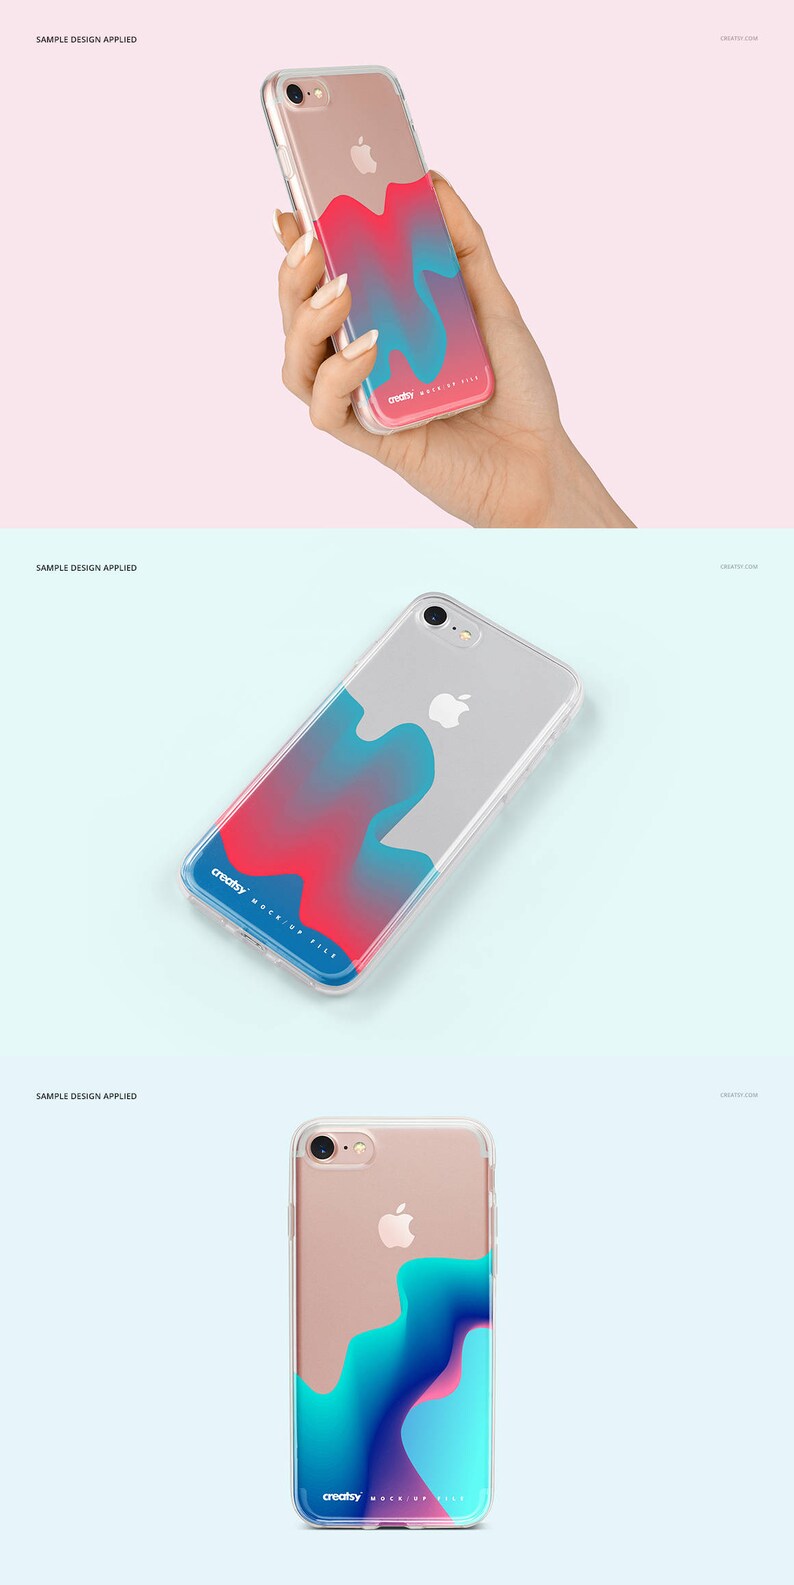 iPhone 7 Clear Case Mockup Set, Clear iPhone Case in hand, Transparent Mockup Bundle, Many Views, iPhone 7 Silicone Case Mockup, Template image 5